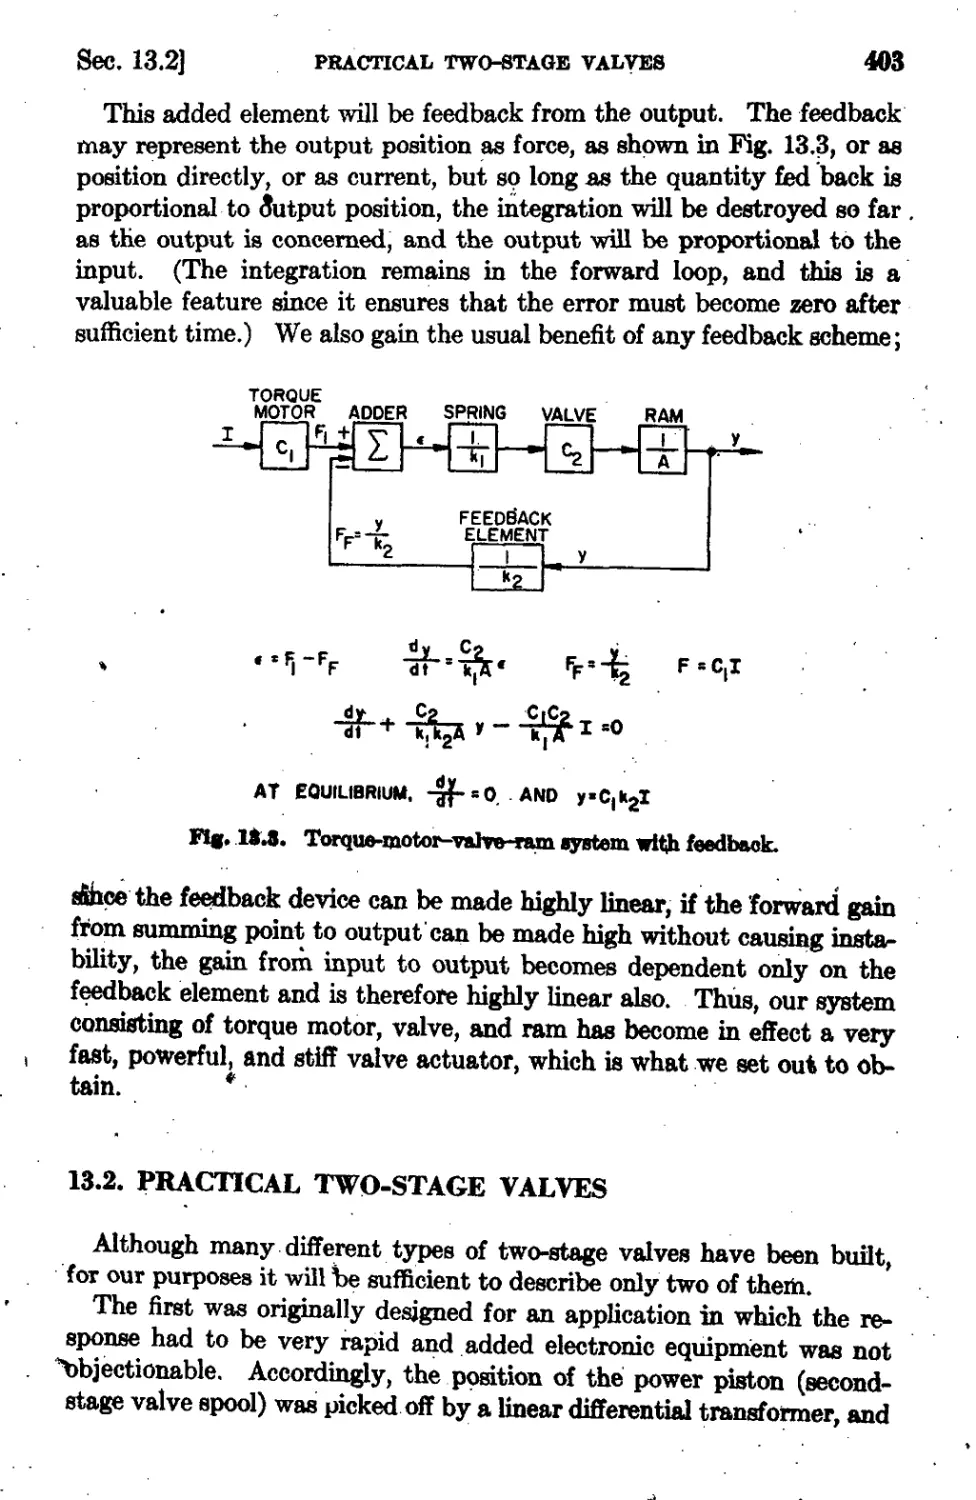 13.2 Practical Two-Stage Valves